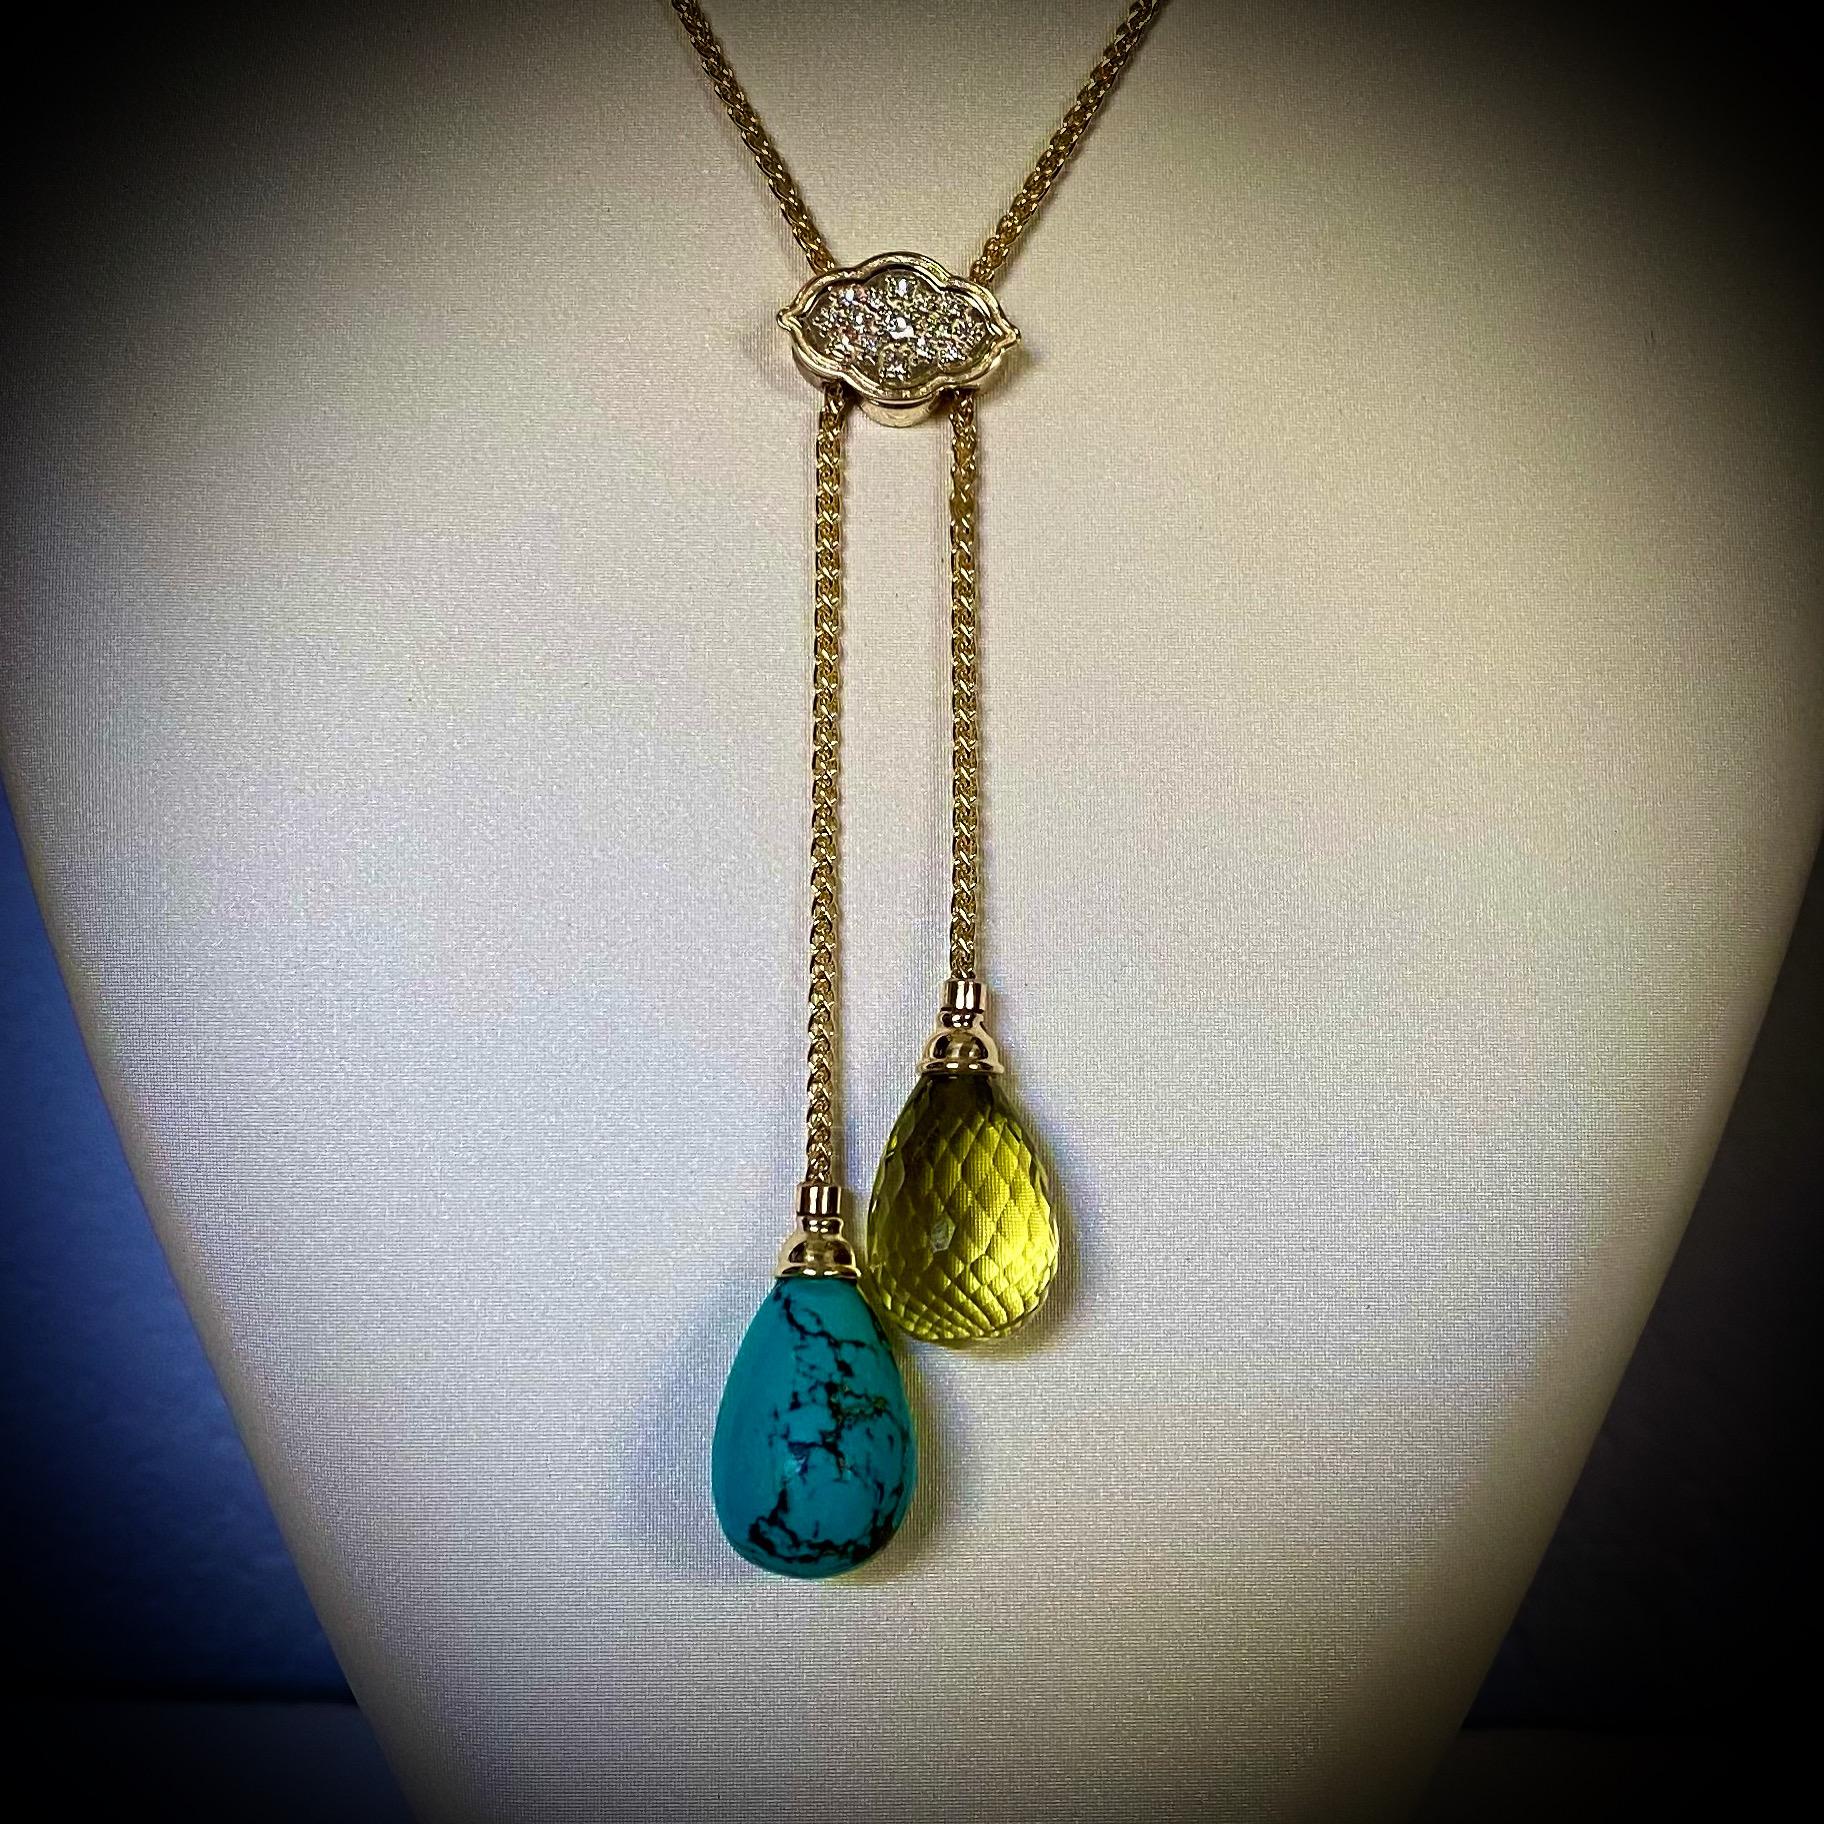 Chinese Spiderweb turquoise is paired with lemon citrine in this elegant lariat necklace.  The fine black webbing dramatically contrasts with the bold color of the turquoise drop.  A brightly colored lemon citrine briolette adds a cool color